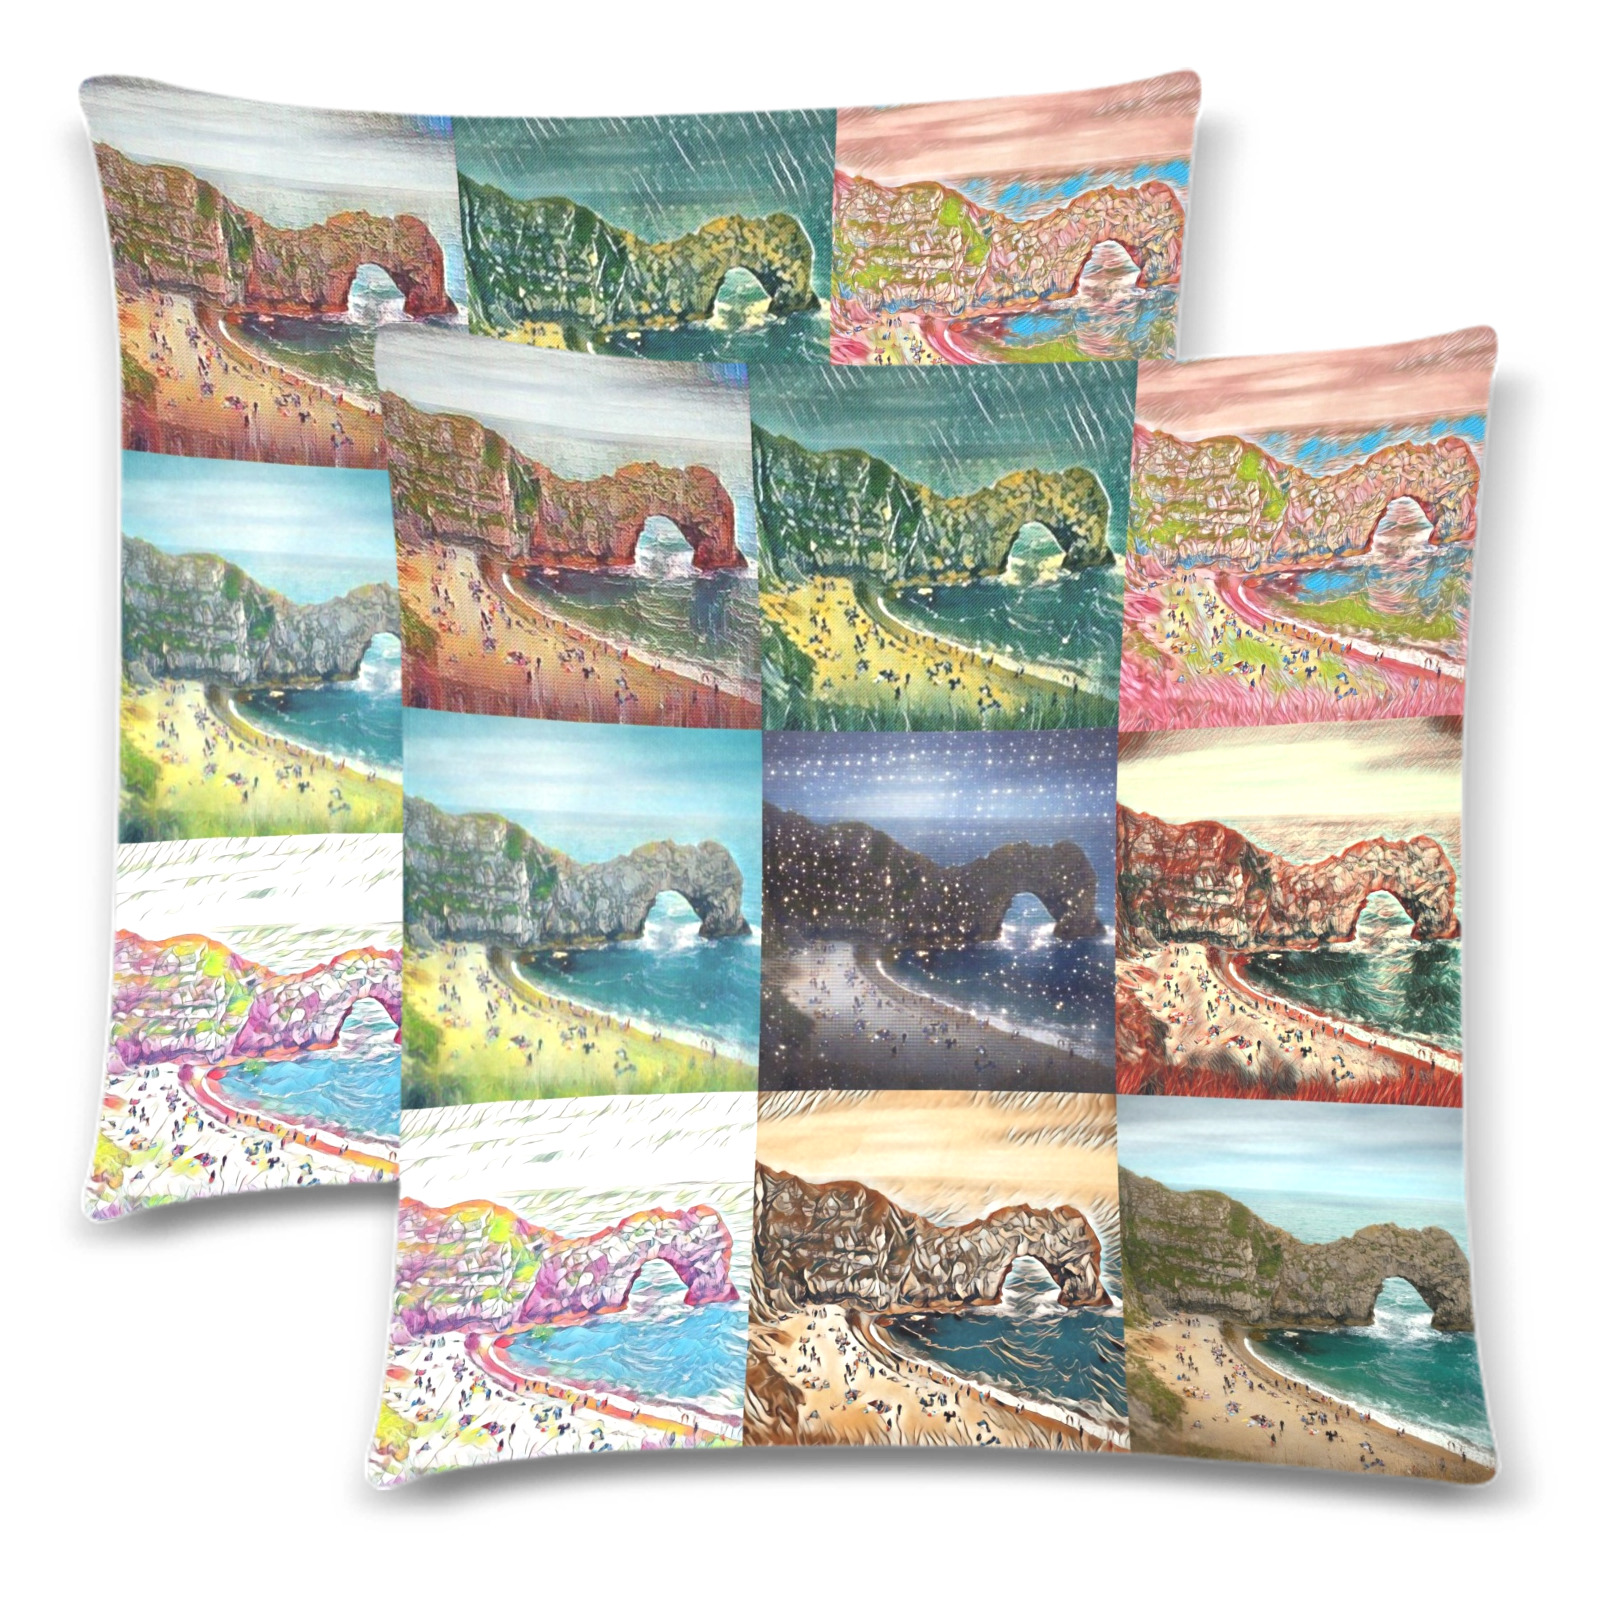 Durdle Door, Dorset, England Collage Custom Zippered Pillow Cases 18"x 18" (Twin Sides) (Set of 2)